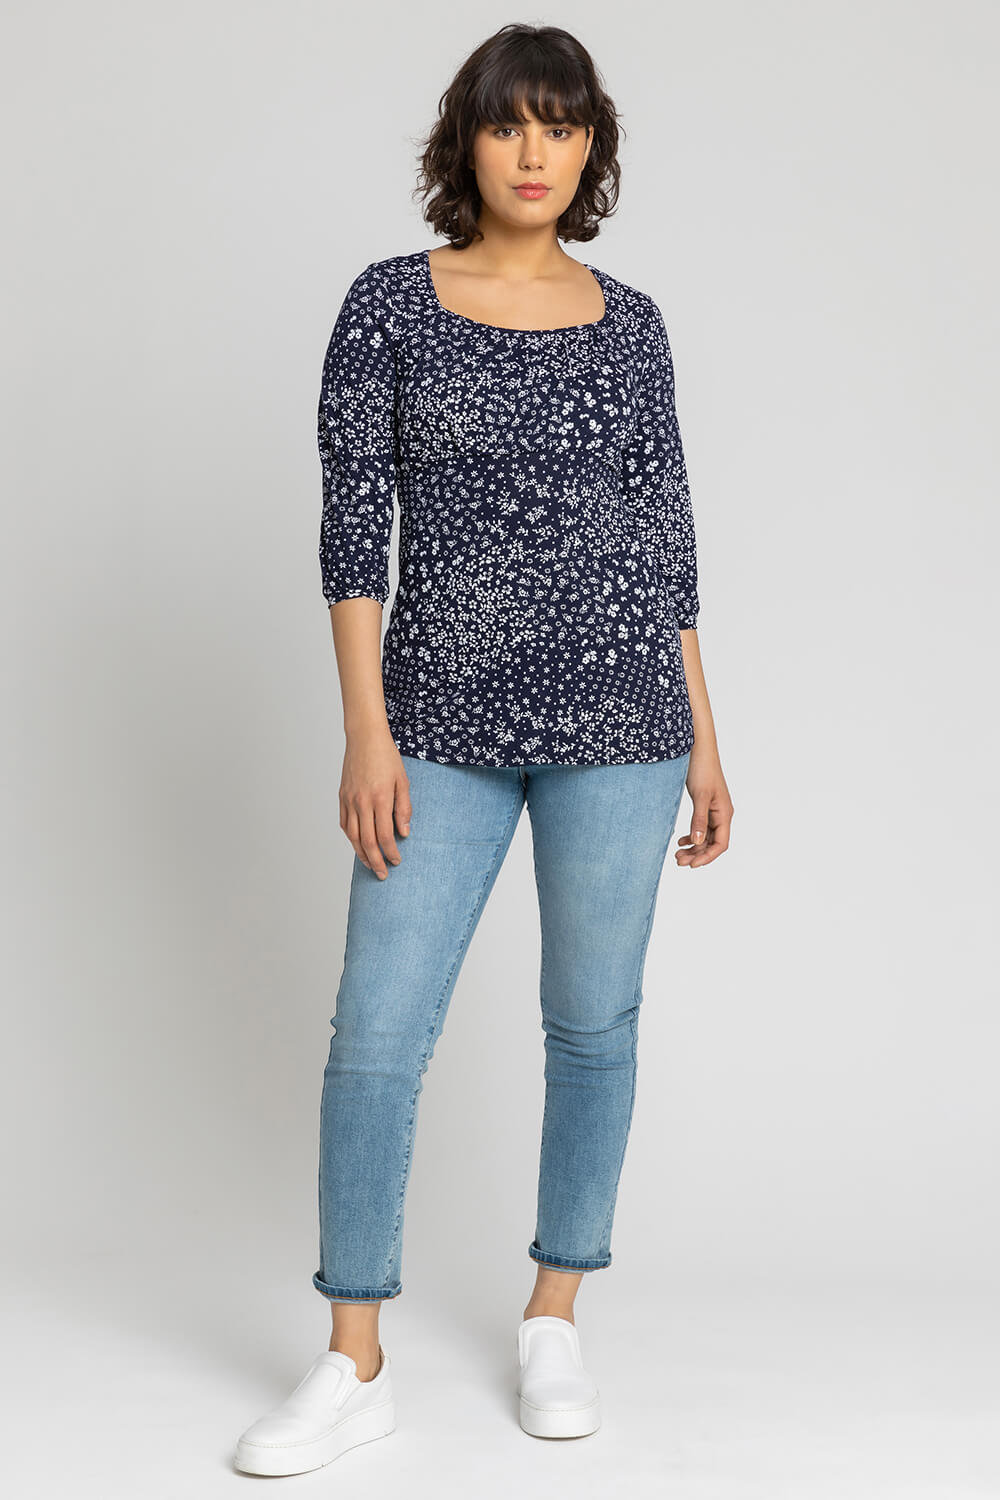 Navy  Ditsy Floral Print Gathered Top, Image 3 of 4